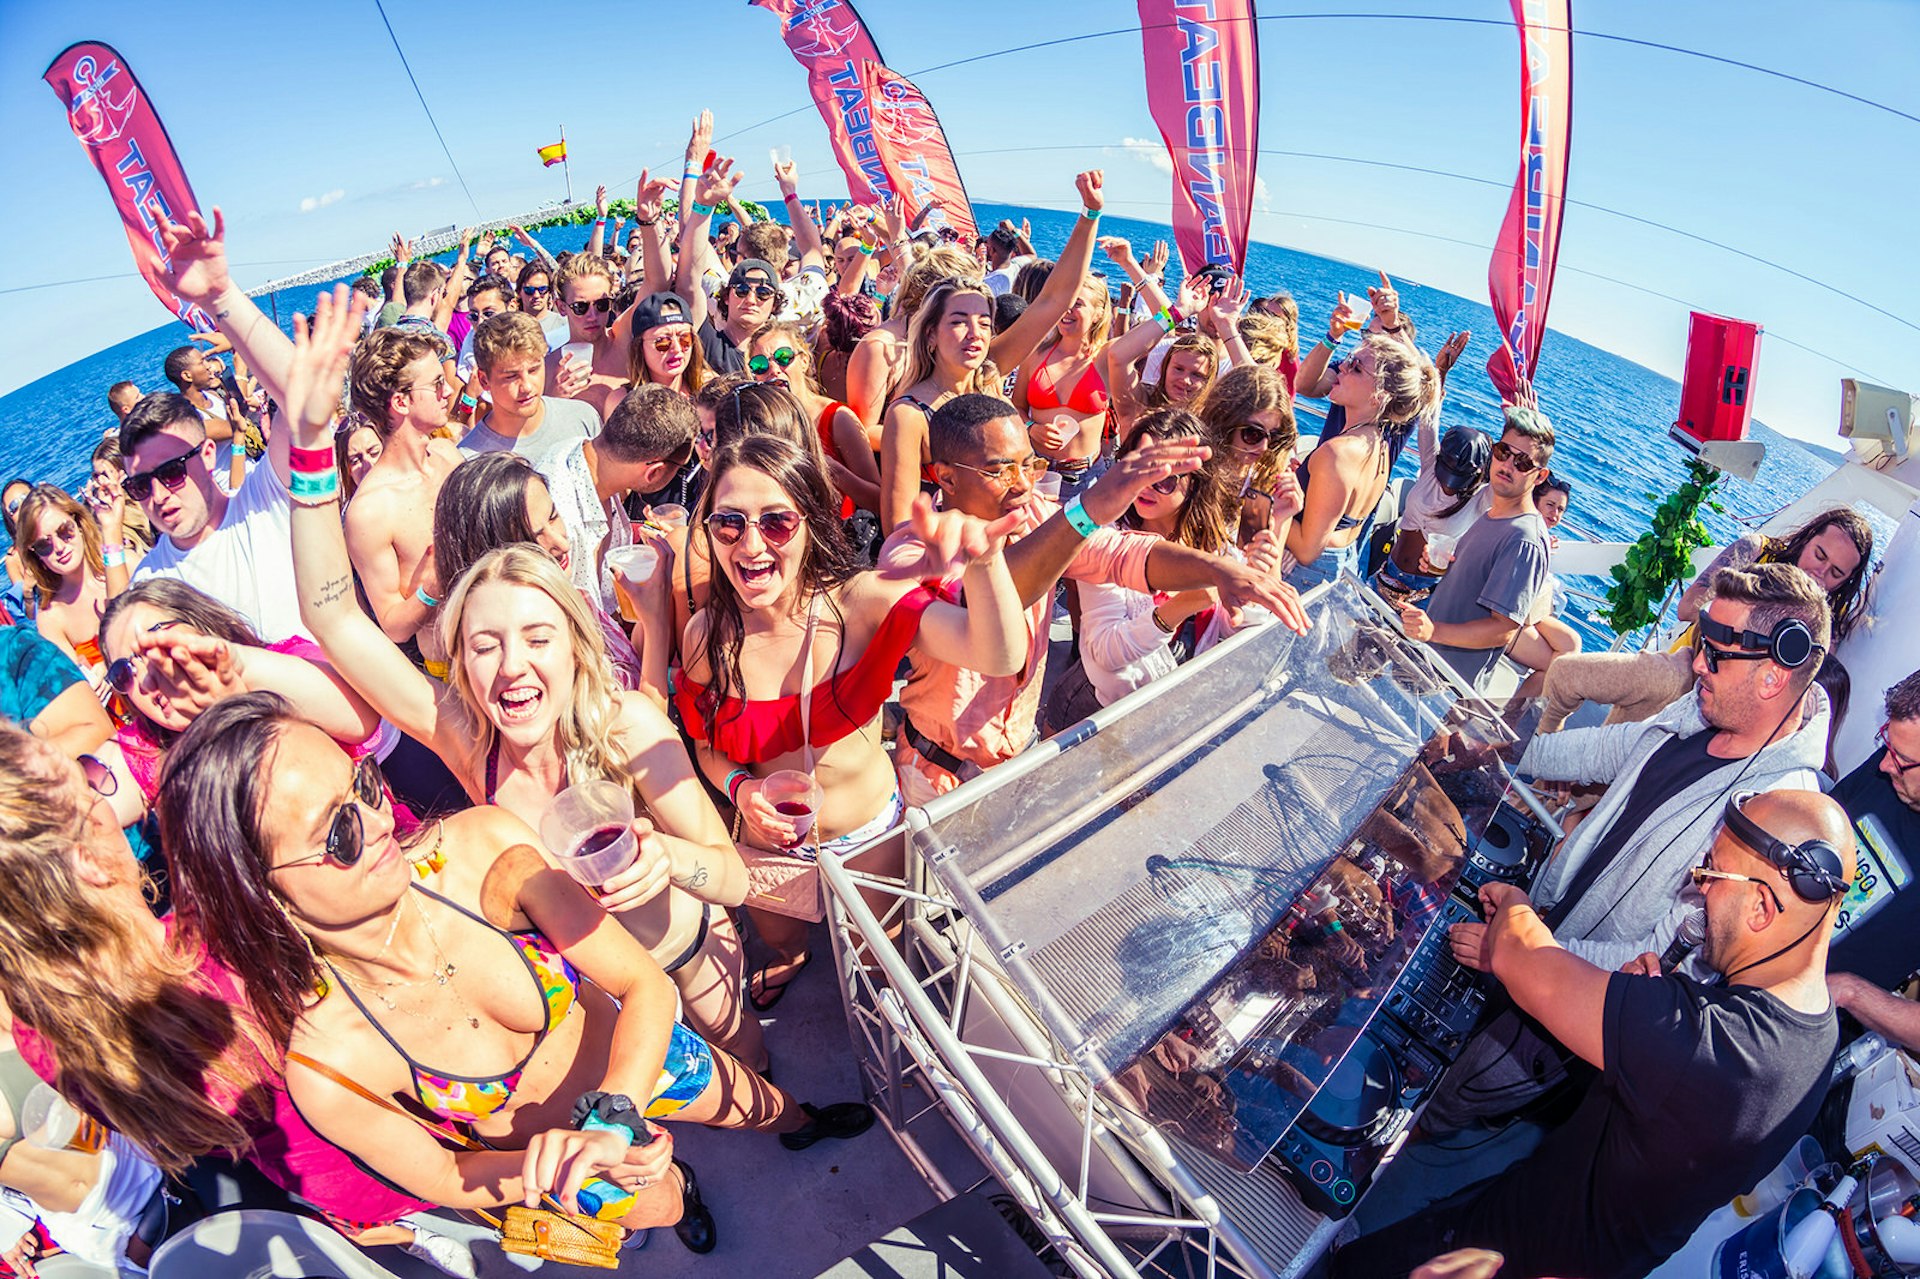 A large crowd on the deck of a boat gather around a DJ deck with two men wearing headphones. The crowd are wearing swimwear and have their hands in the air, there are large red flags saying 'Ocenbeat' around the sides of the boat